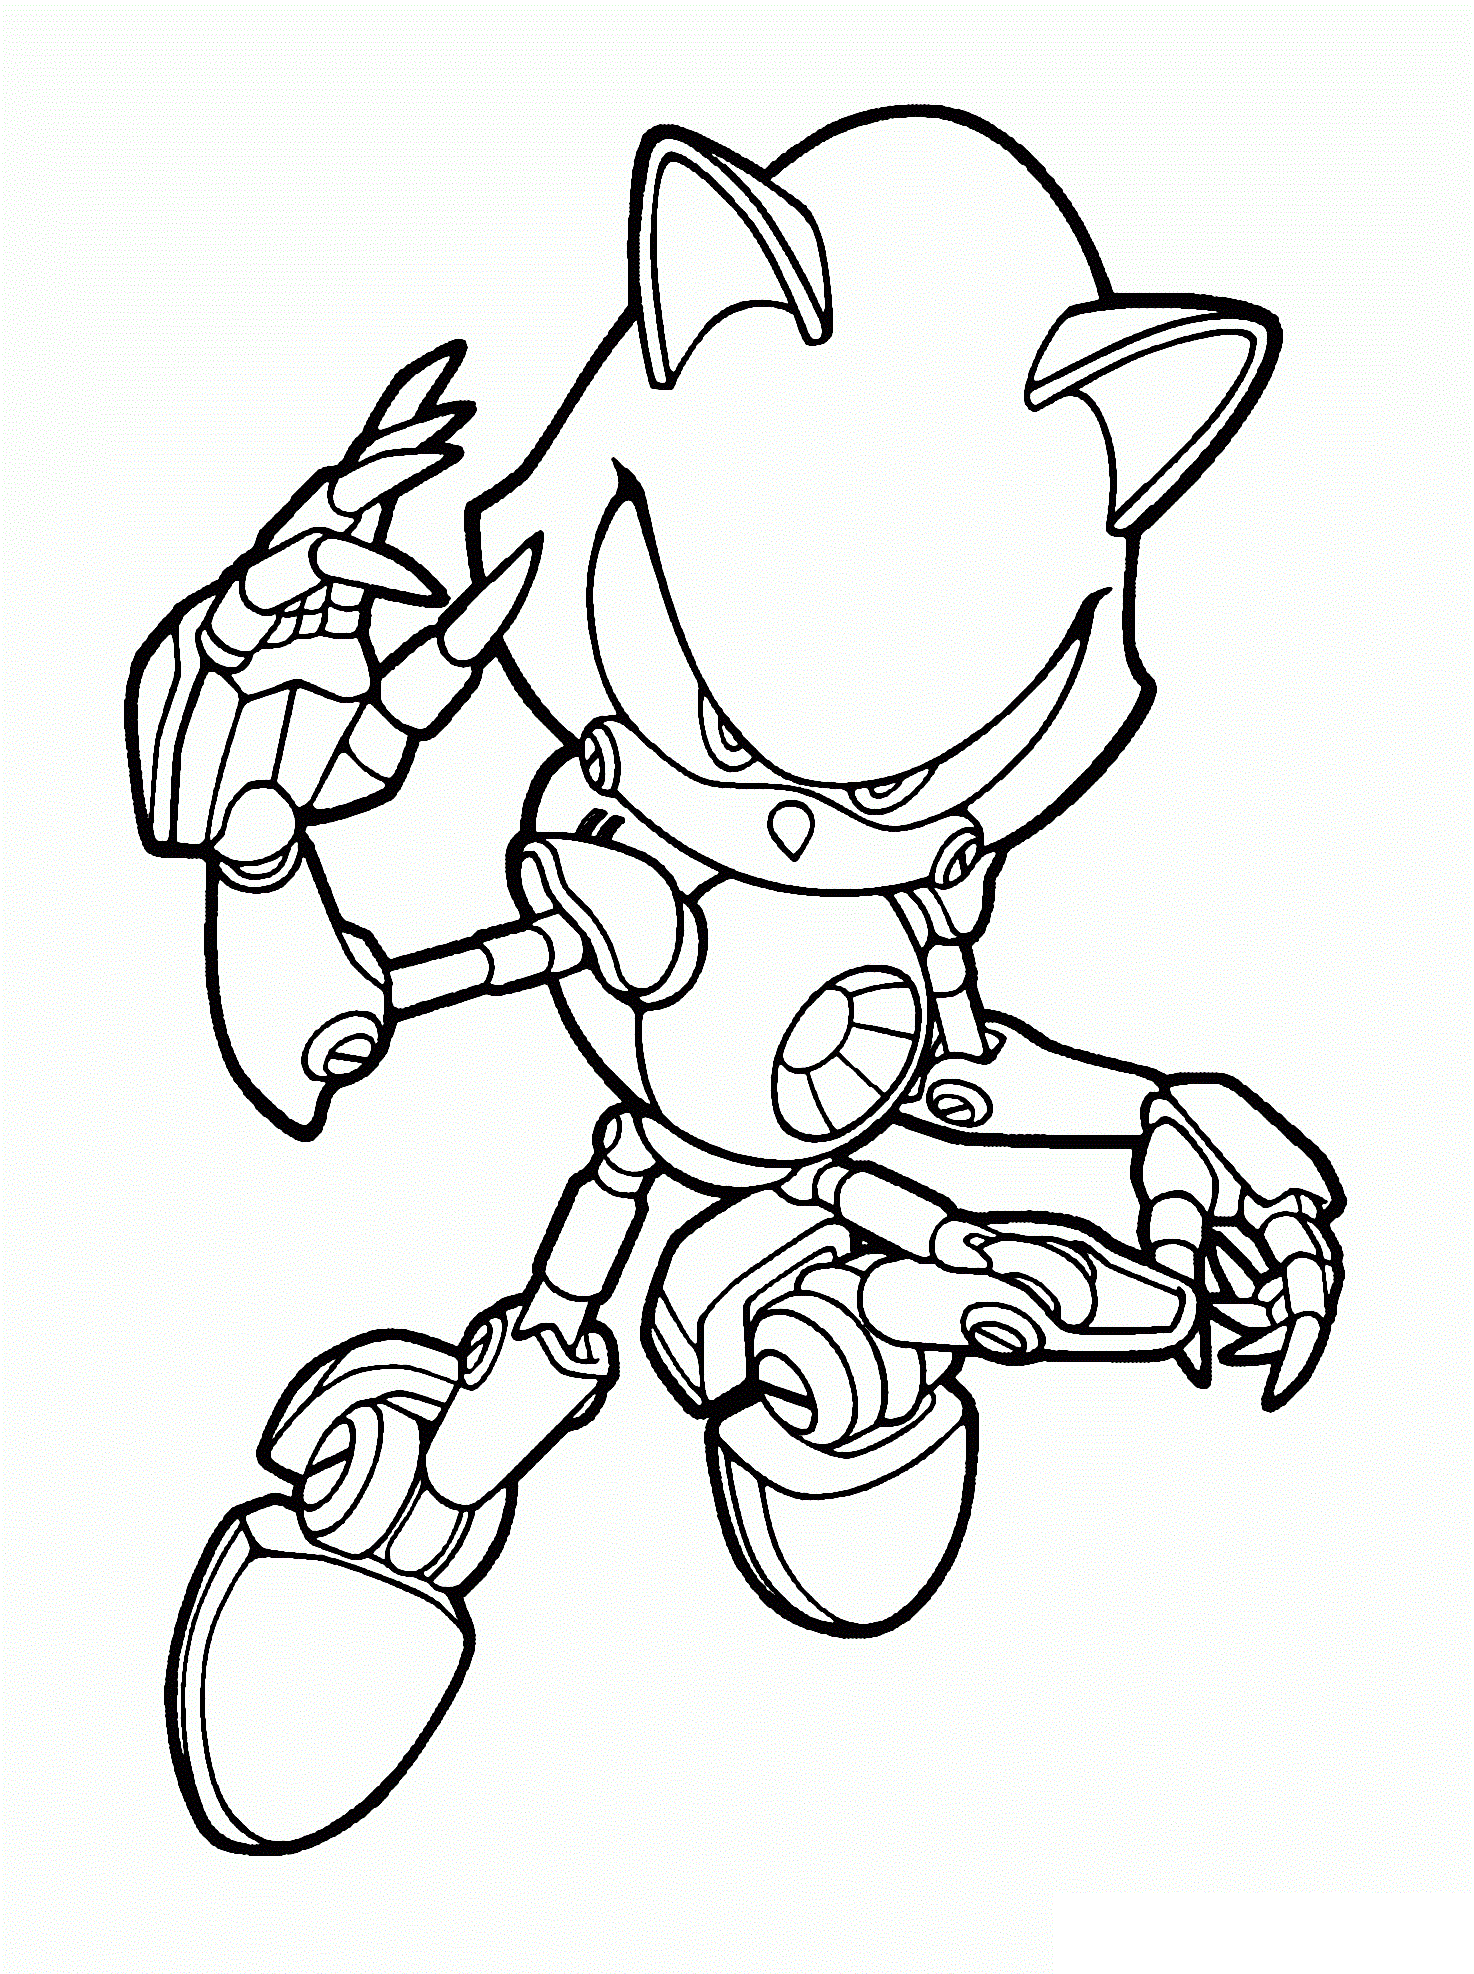 Download Metal Sonic Coloring Page Free Printable Coloring Pages For Kids